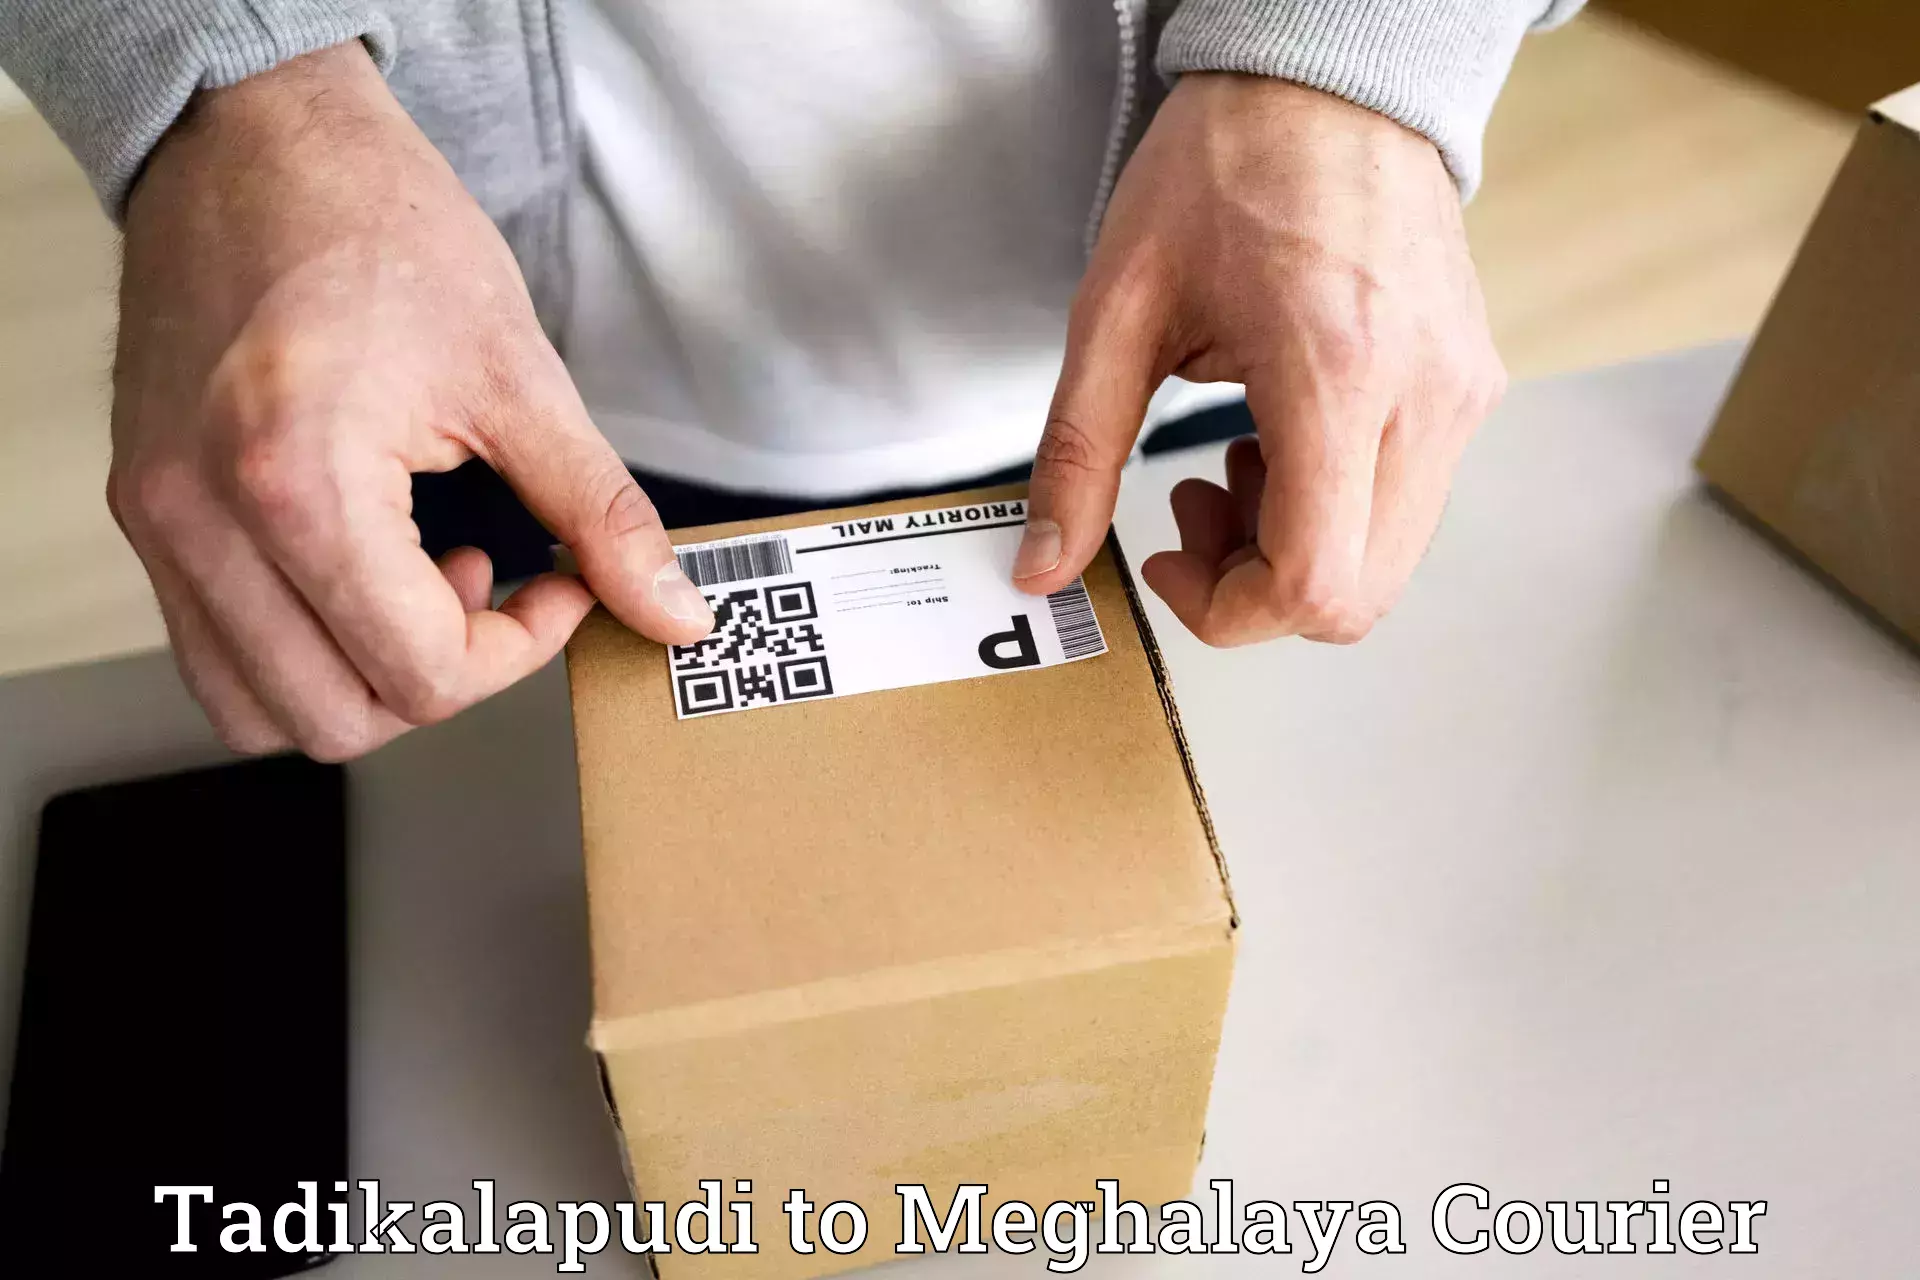 State-of-the-art courier technology Tadikalapudi to Nongstoin